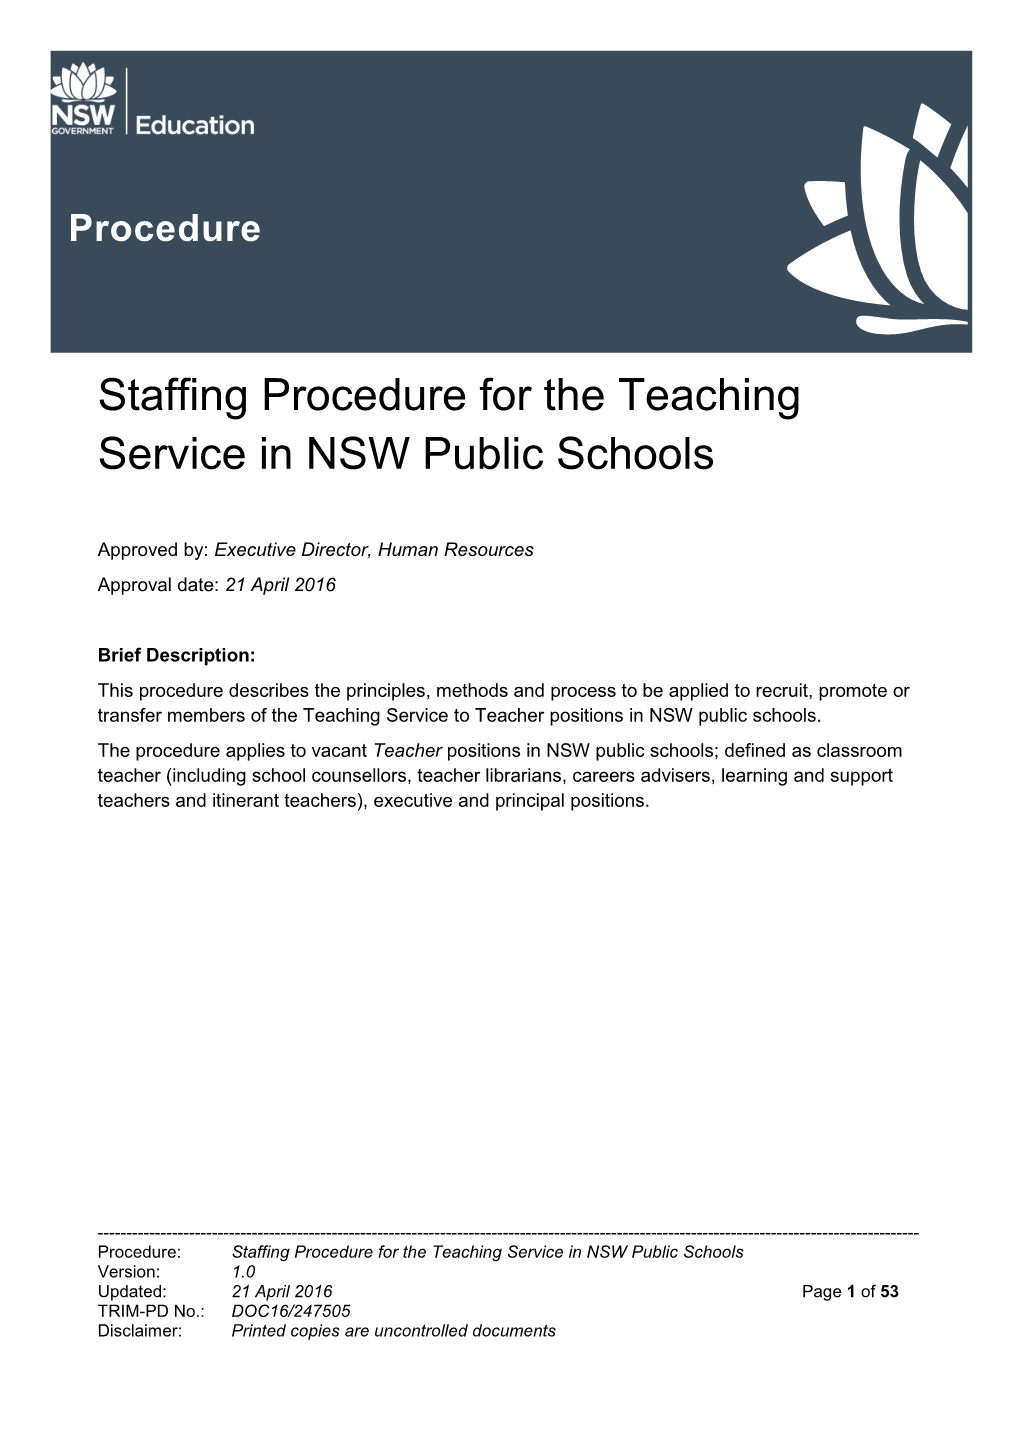 Staffing Procedure for the Teaching Service in NSW Public Schools